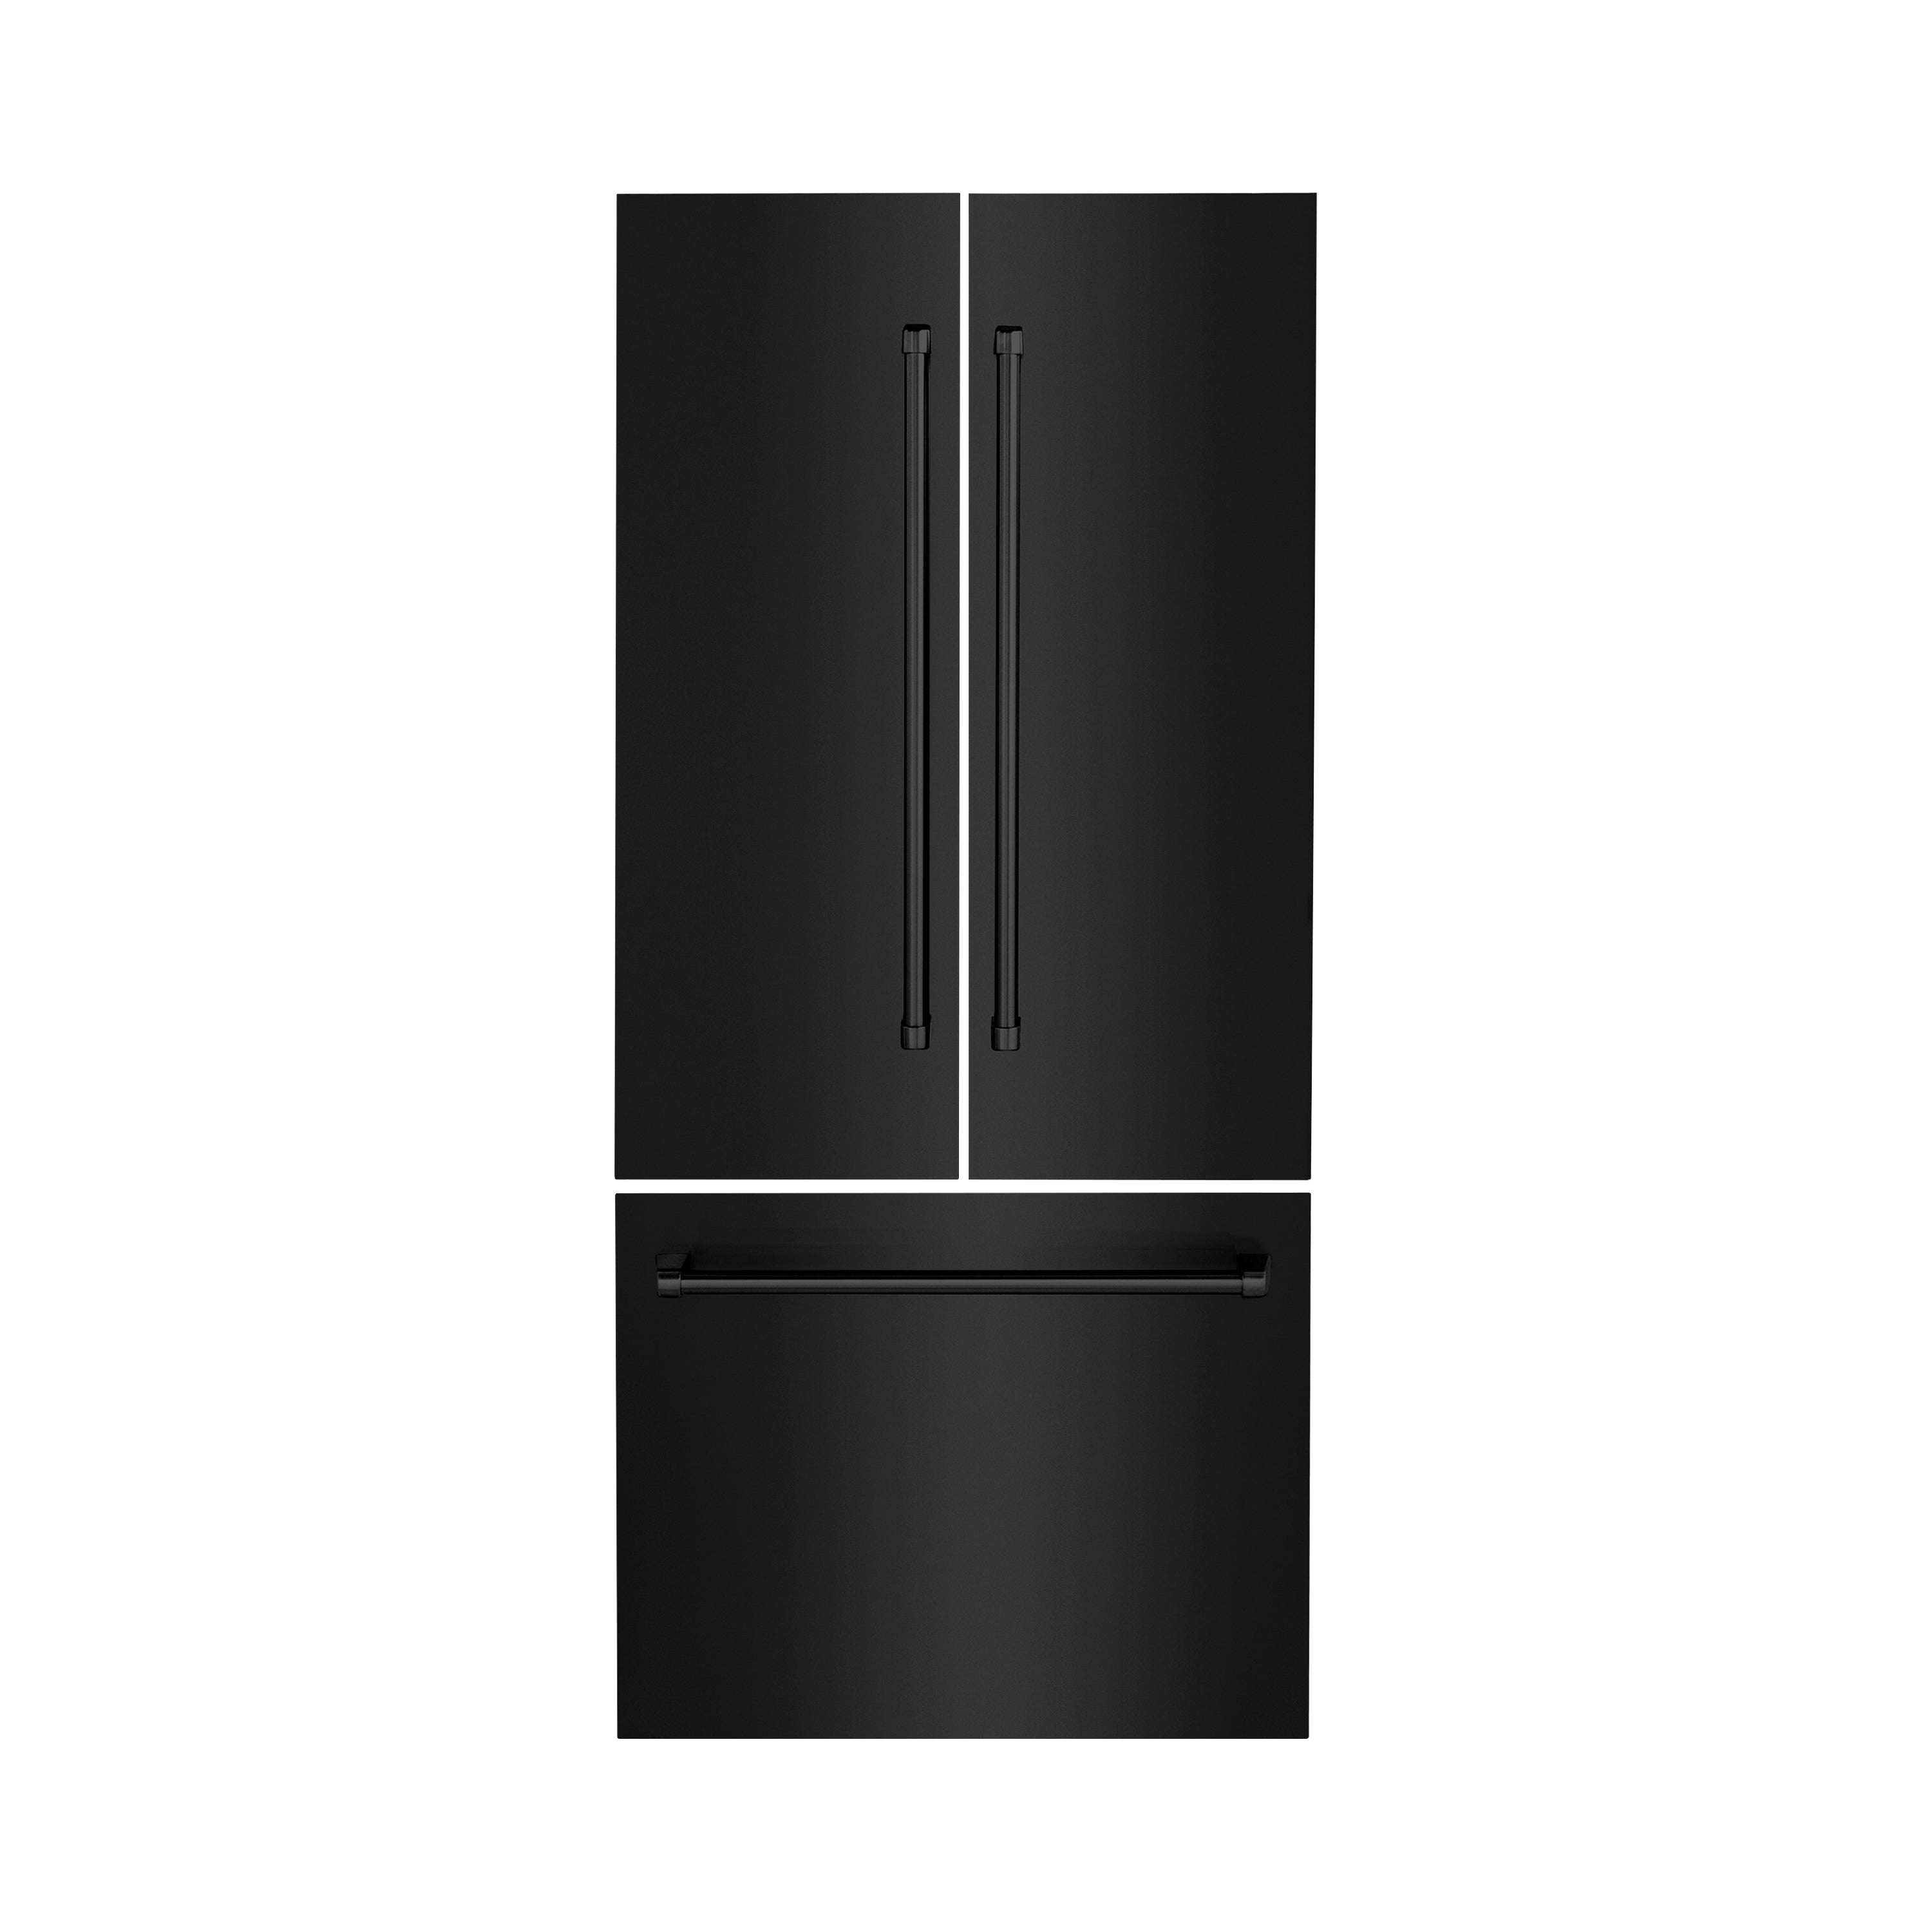 ZLINE 36" Refrigerator Panels in Black Stainless Steel for a 36" Buit-in Refrigerator (RPBIV-BS-36)